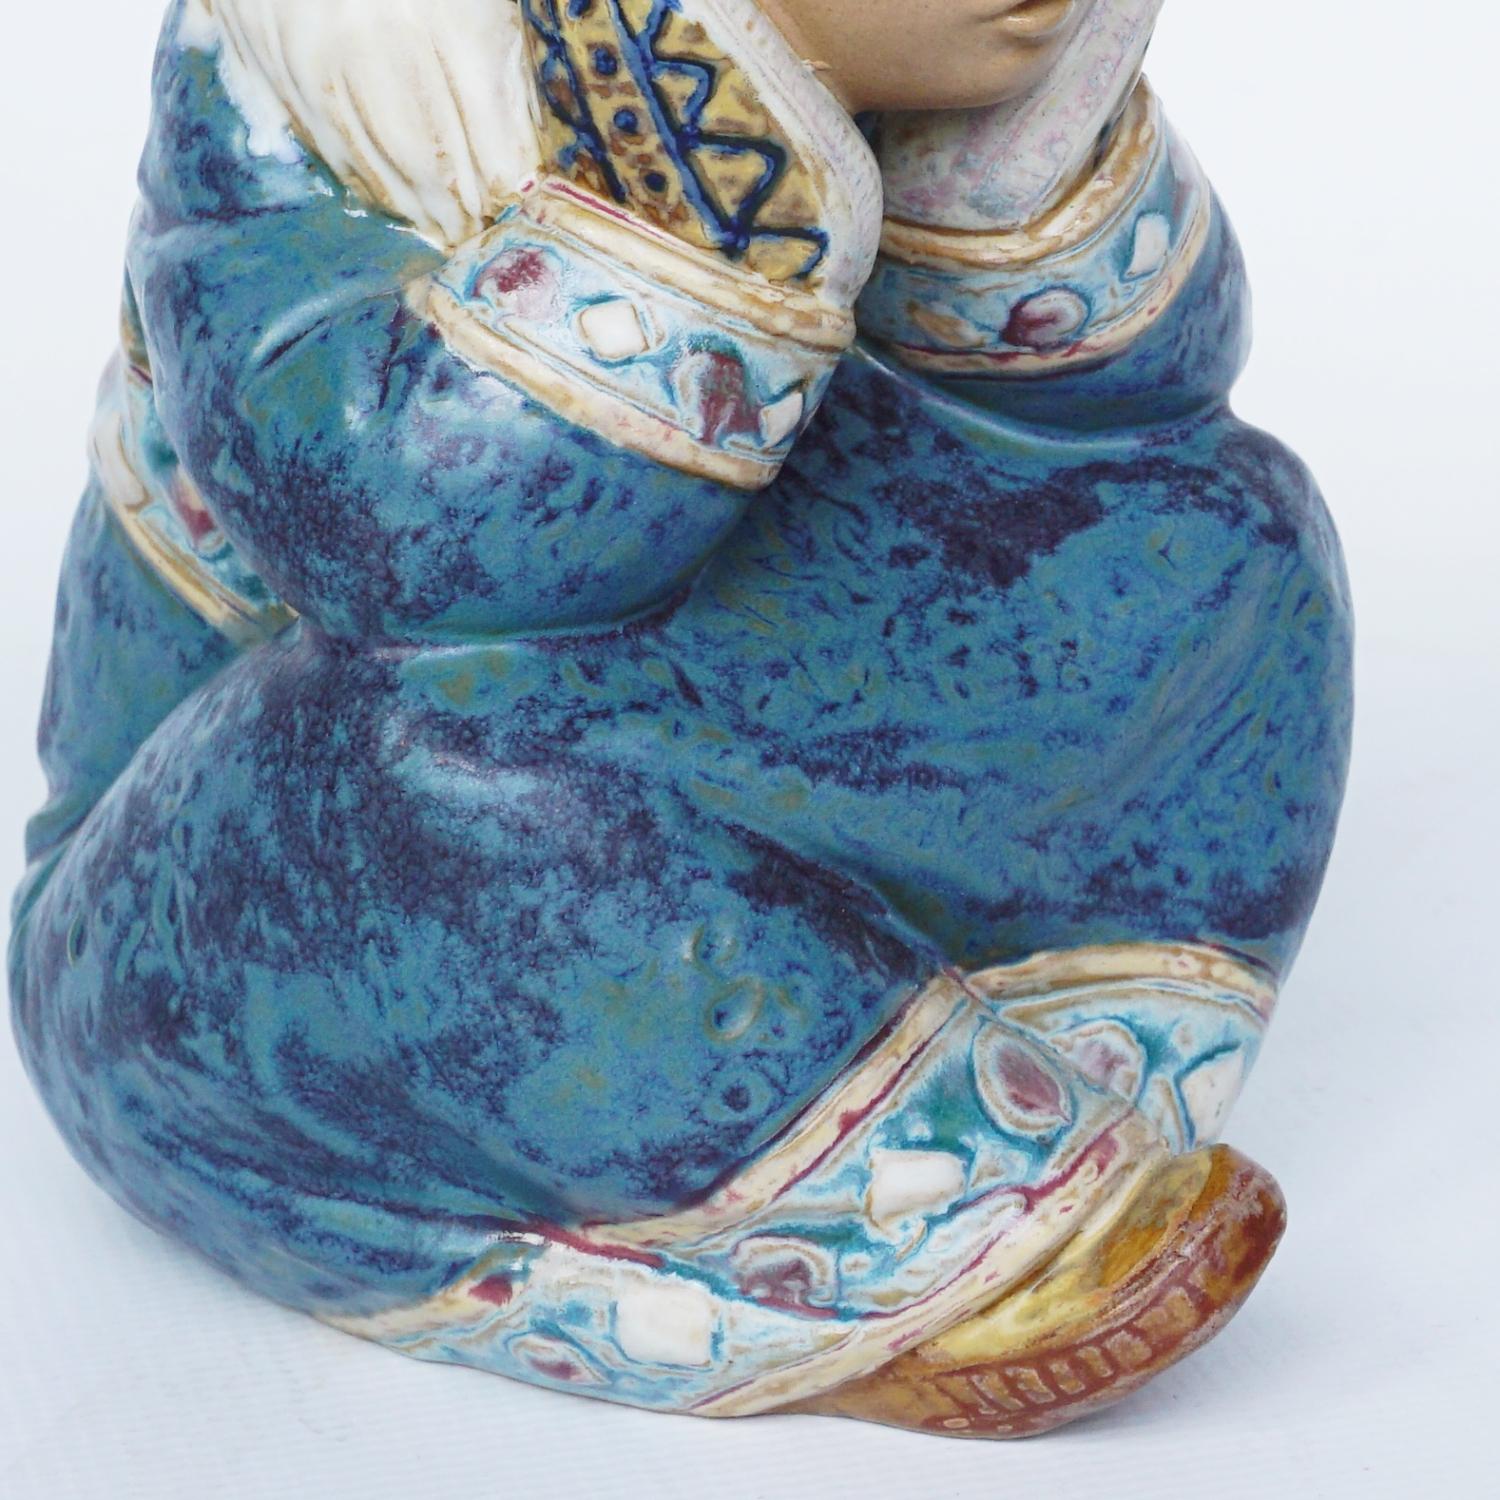 'Pensive Inuit Girl' pottery figure sculpted by Francisco Catalá for Lladró. First issued in 1985. Depicting a young Inuit girl sitting with her mittens pressed to her face. Excellent fine hand painted detail. Numbered 2158.

Dimensions: H 16.5cm W